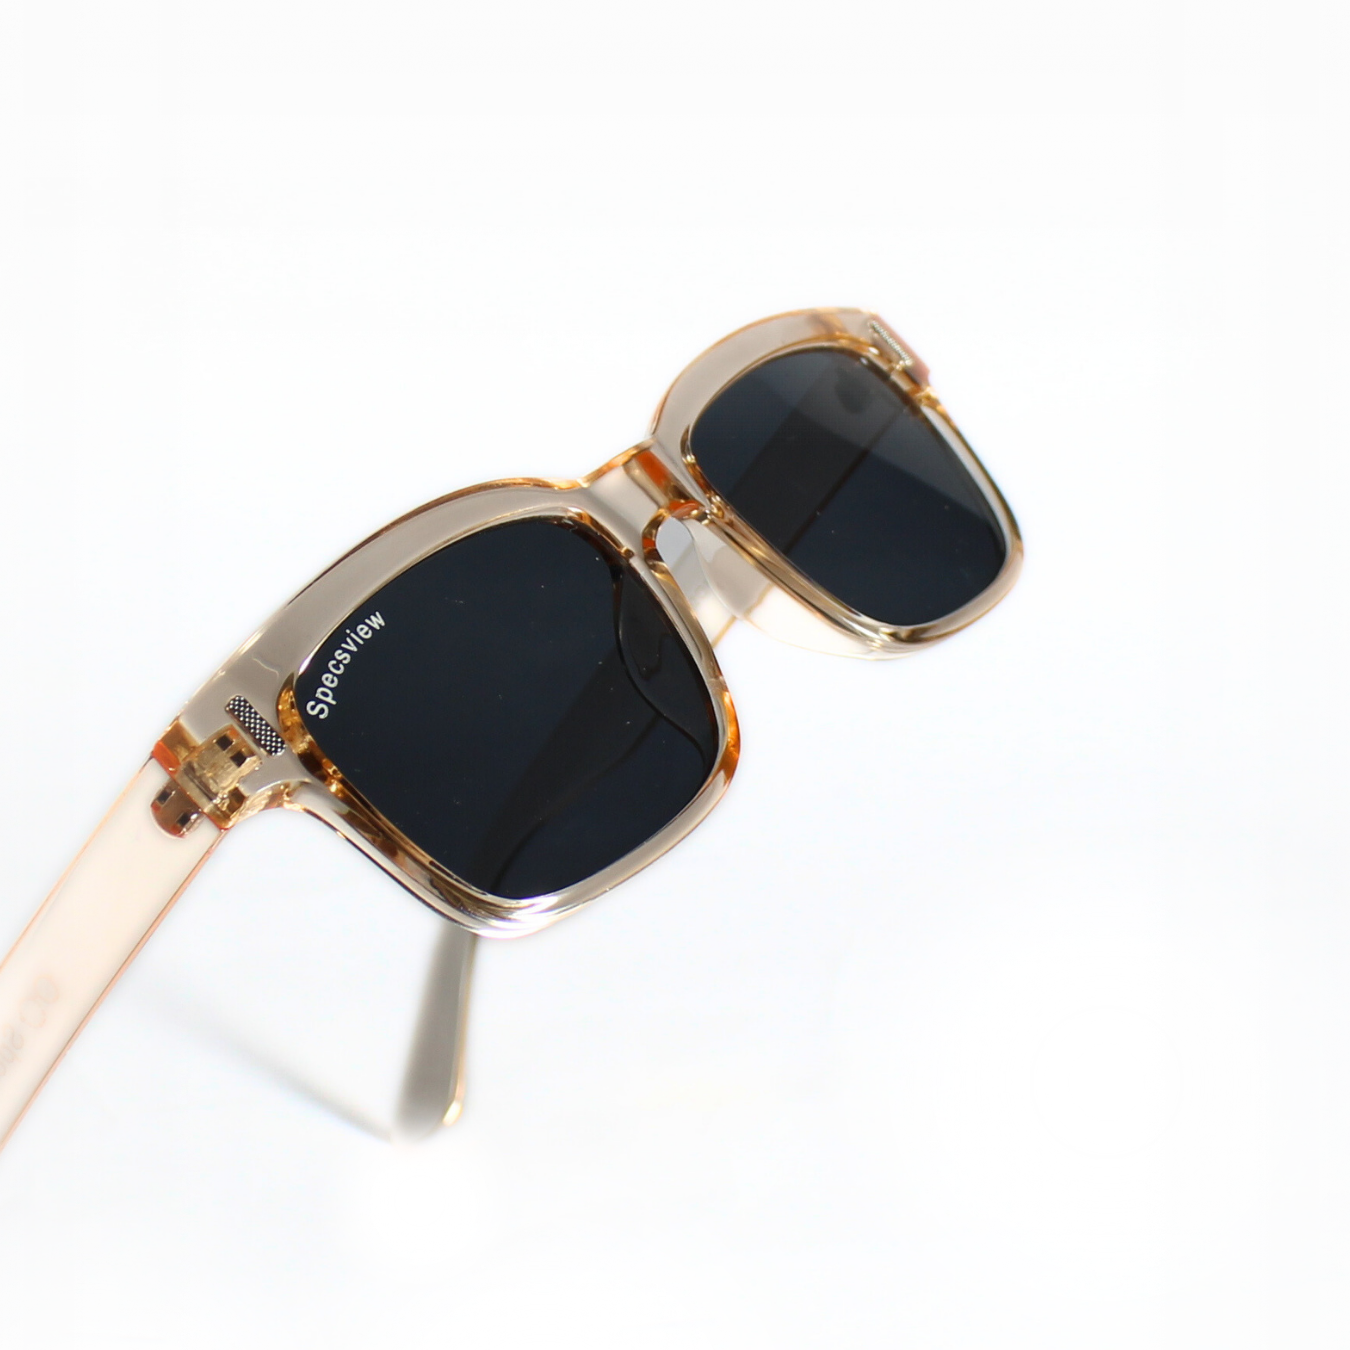 SPECTRE//006 I Sunglasses for Men and Women - Specsview